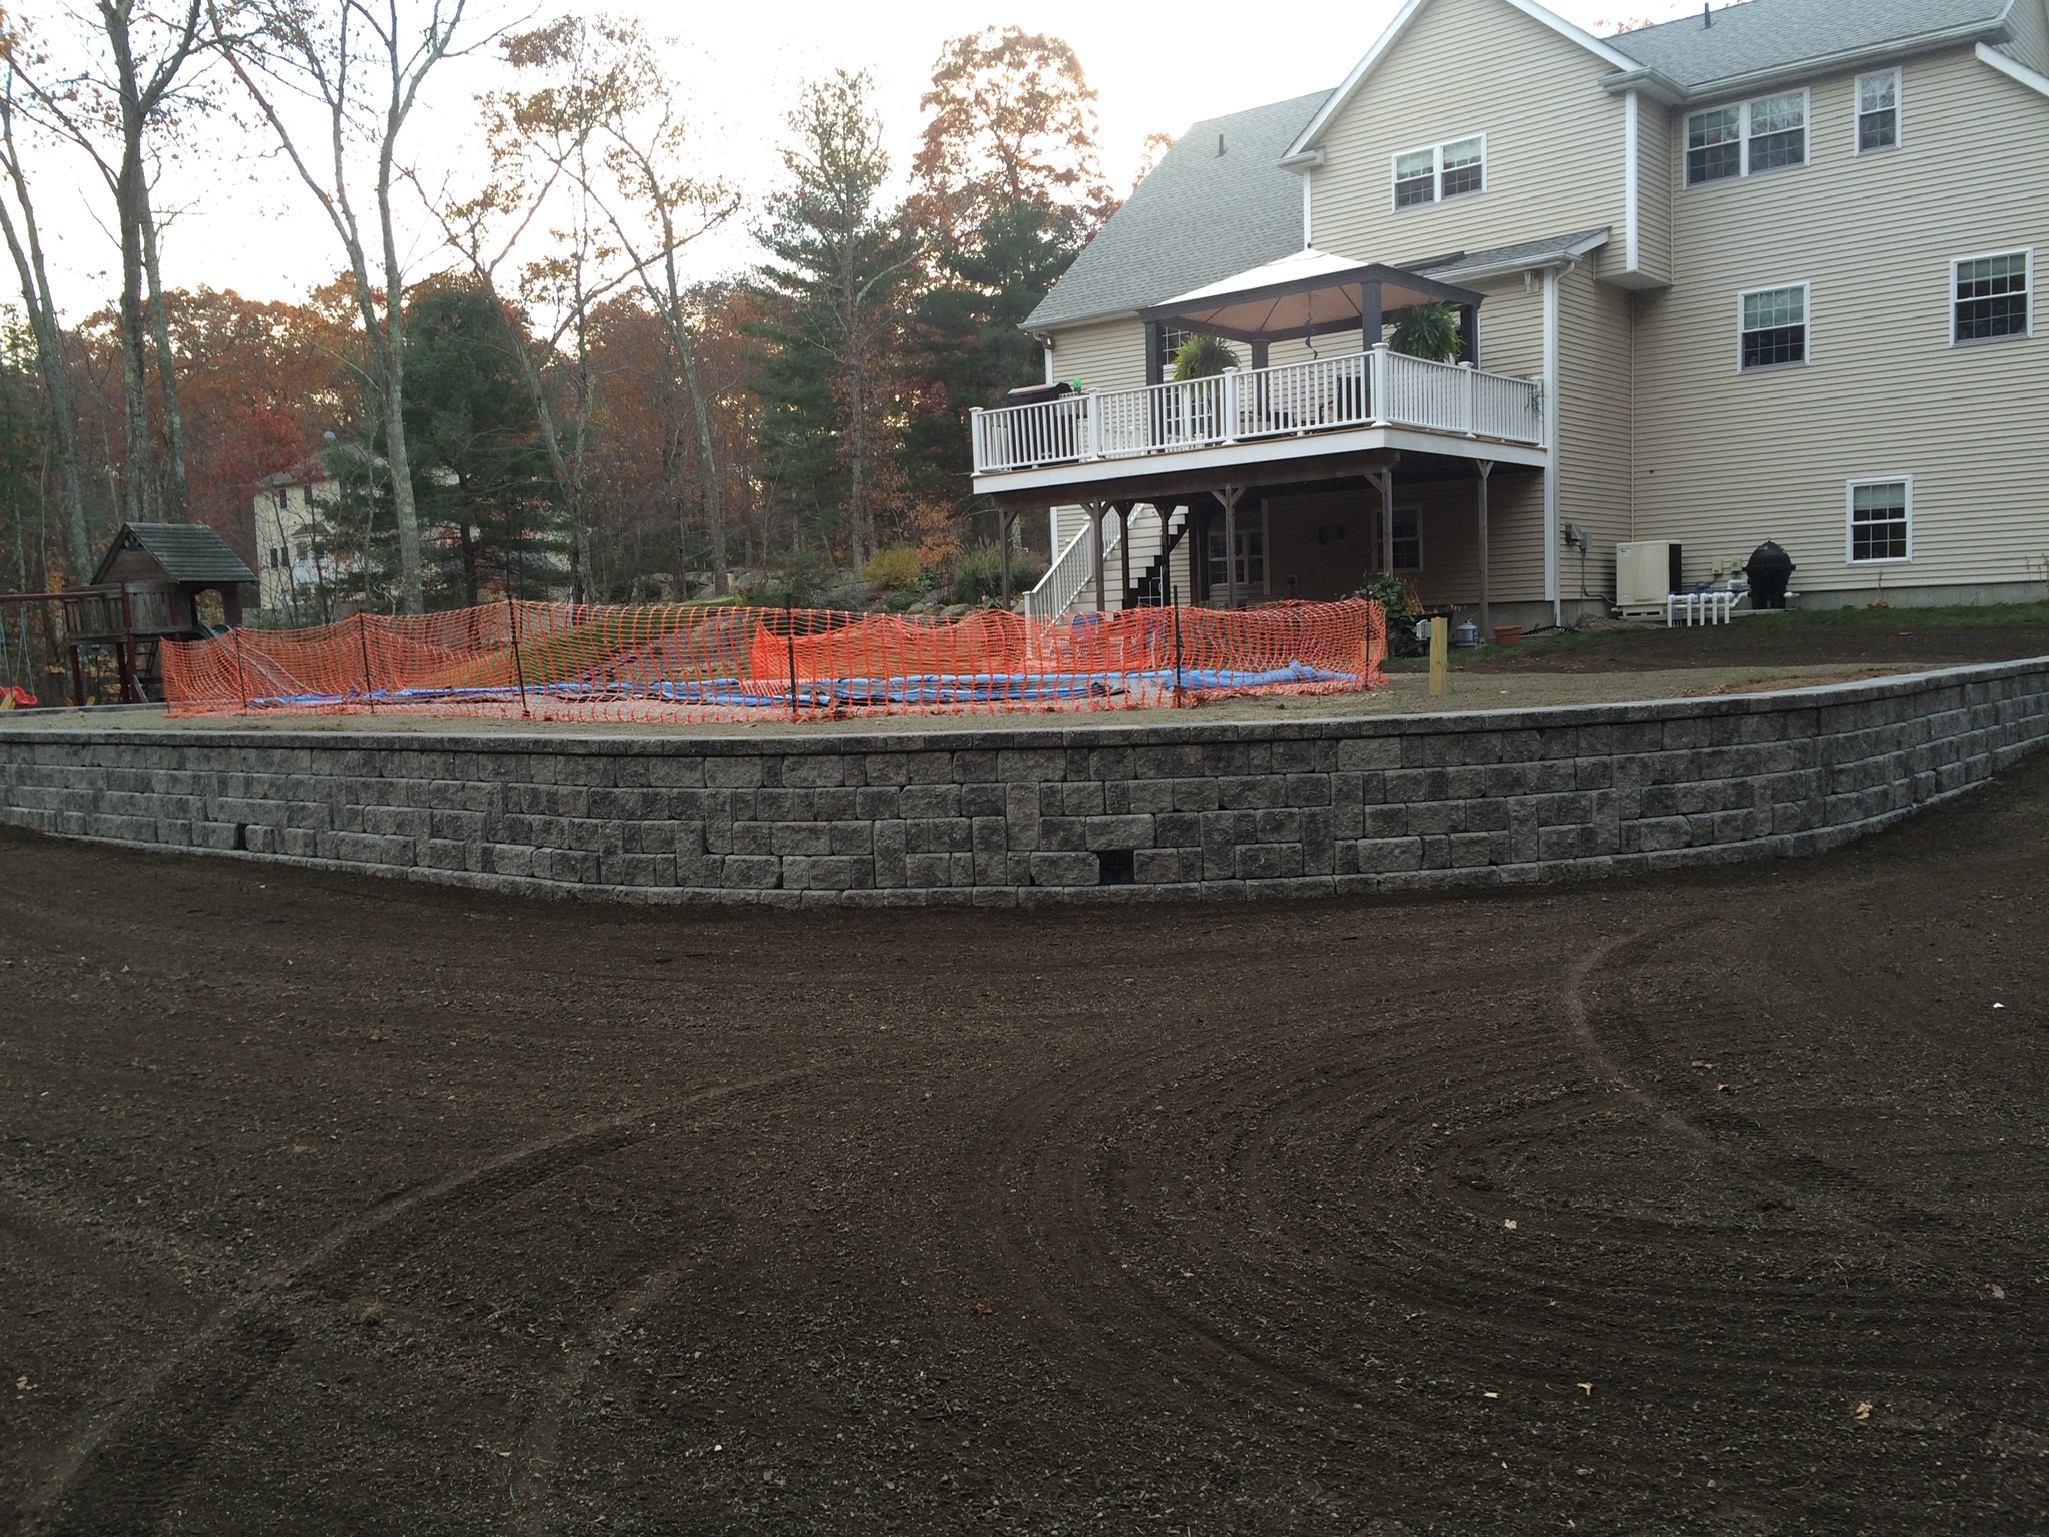 House with stone wall and land being graded